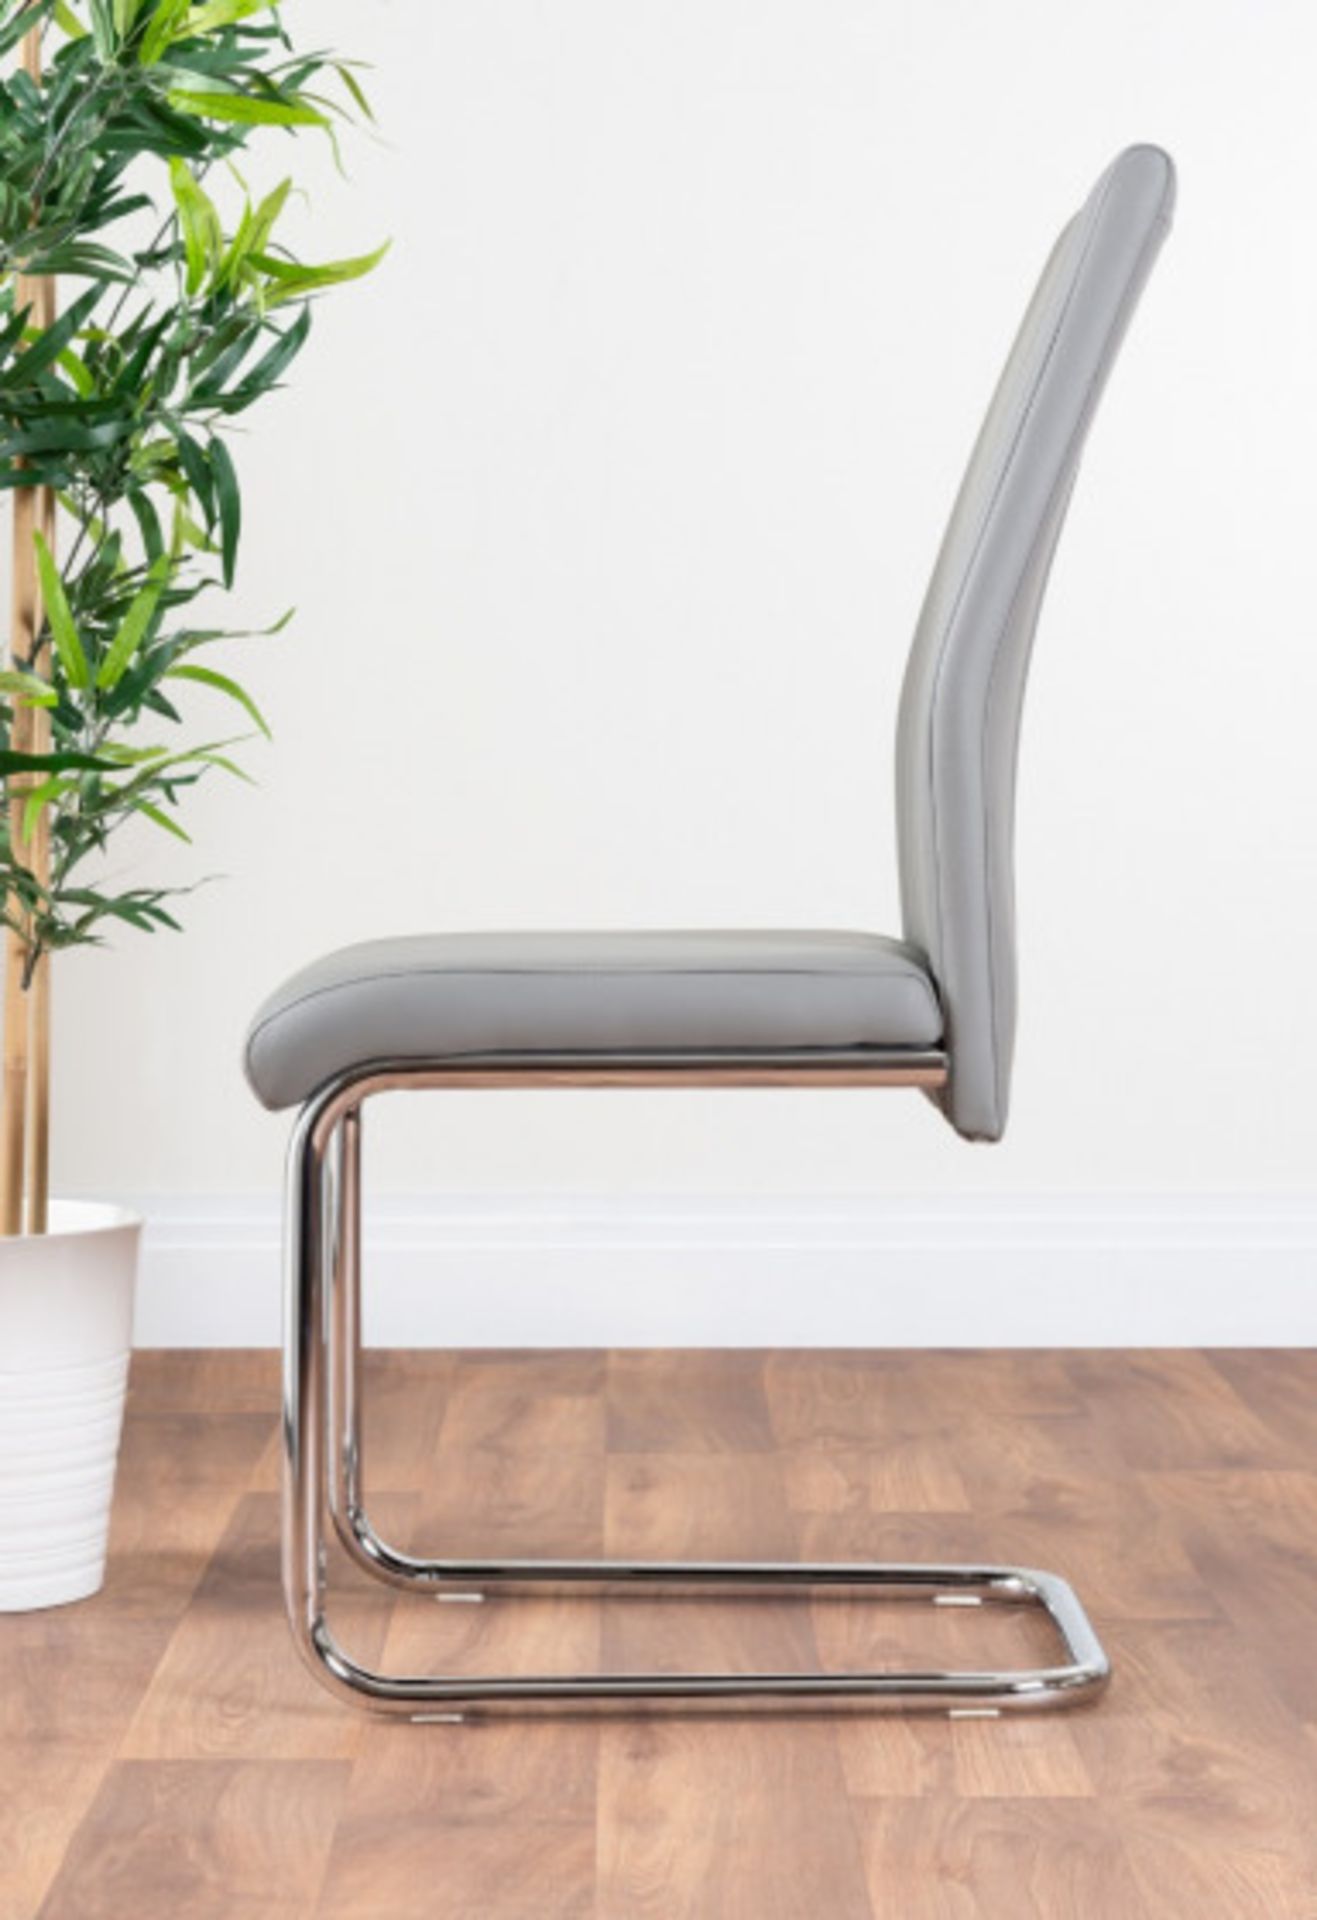 2x Lorenzo Modern Elephant Grey Faux Leather Chrome Dining Chairs - RRP £119.99. - Image 3 of 4